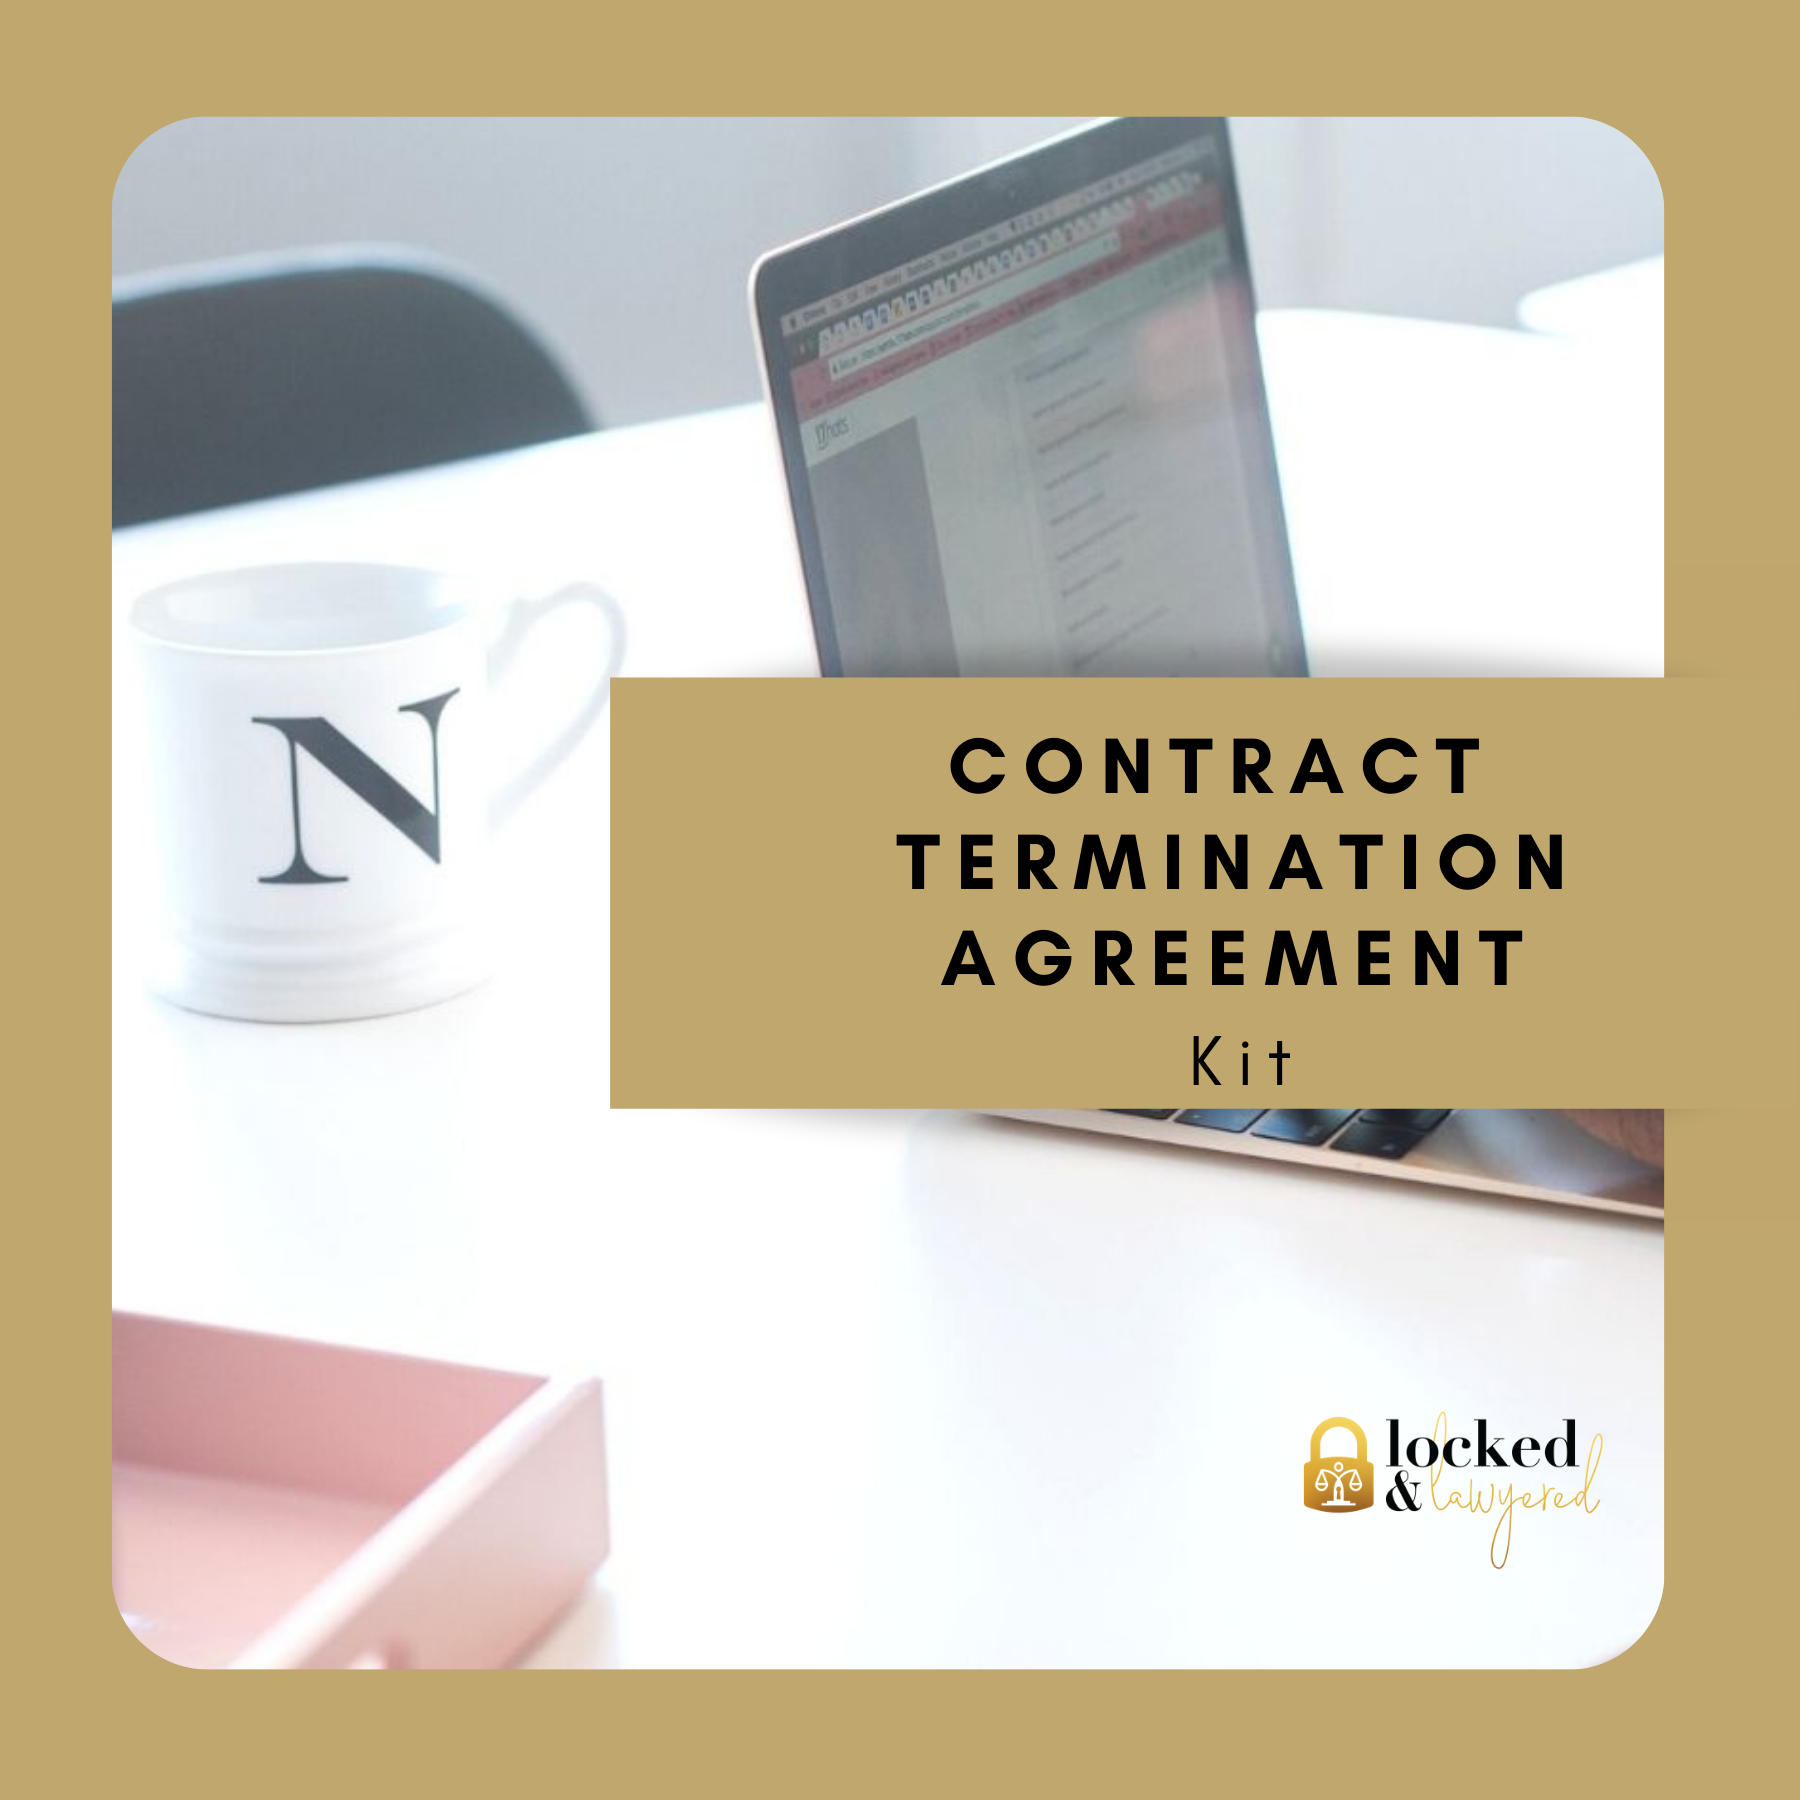 Contract Termination Agreement Kit